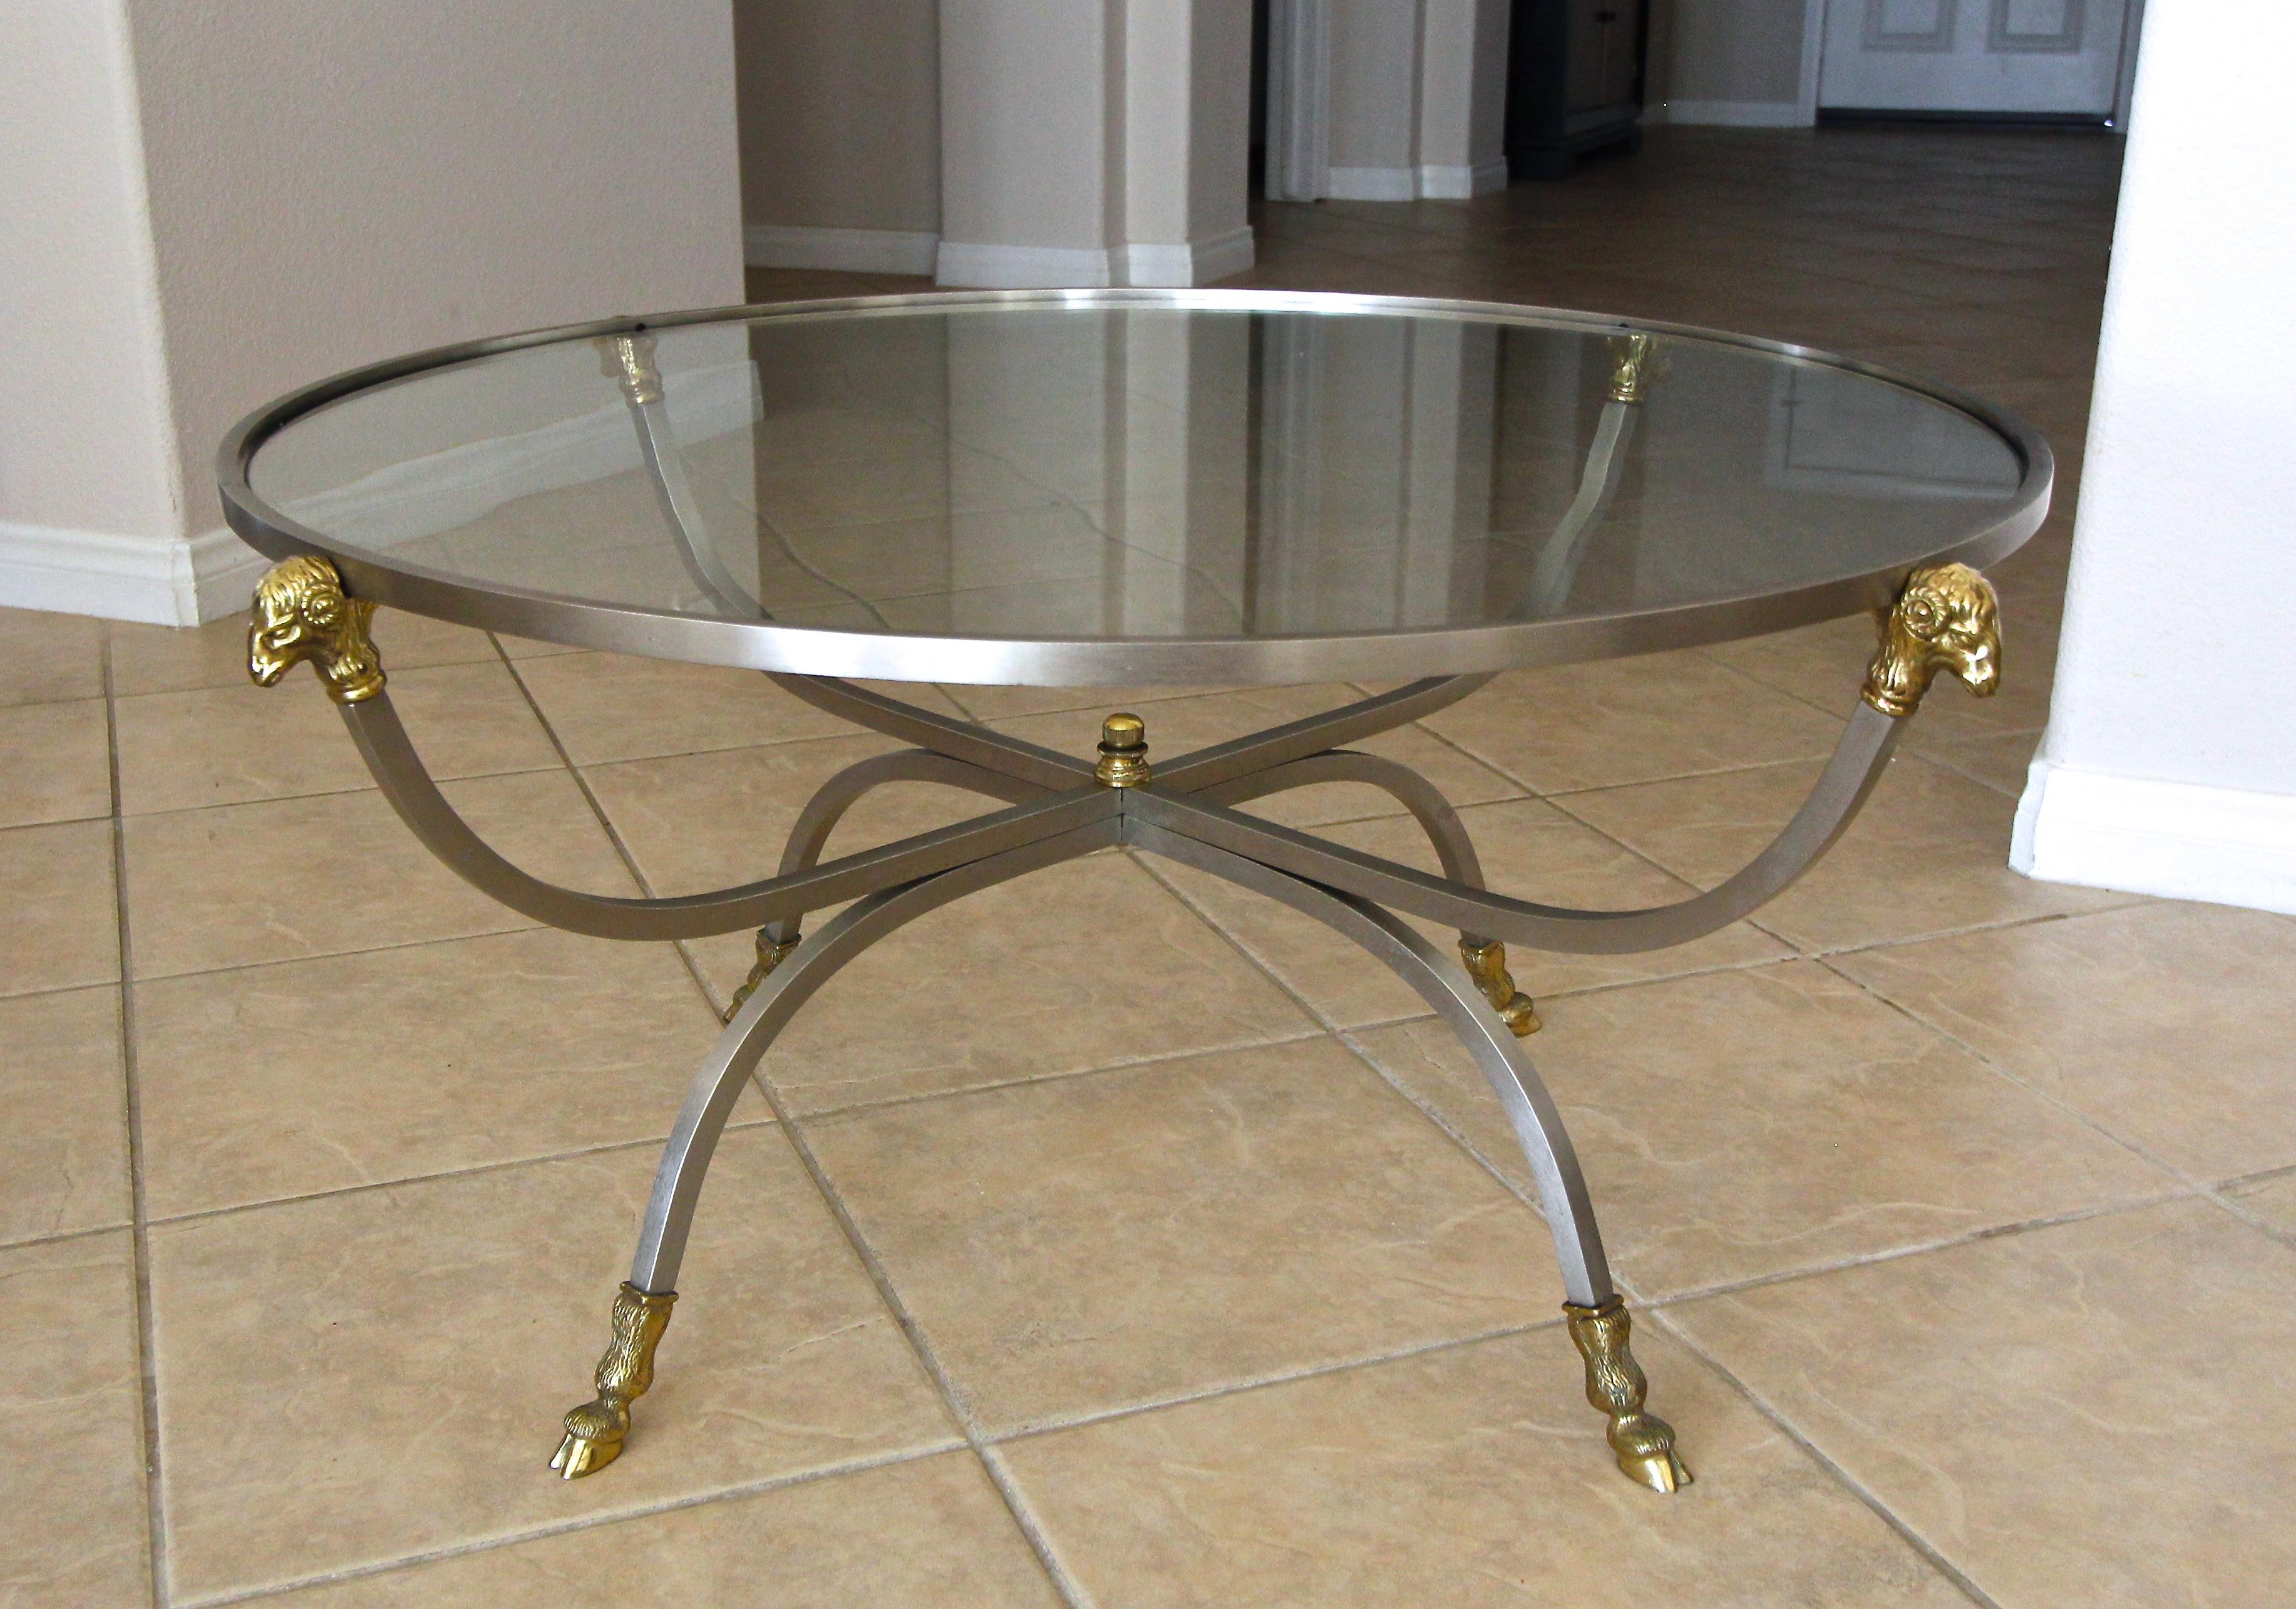 Italian steel and brass round cocktail or coffee table with ram's head and hoof detailing, stamped on frame 